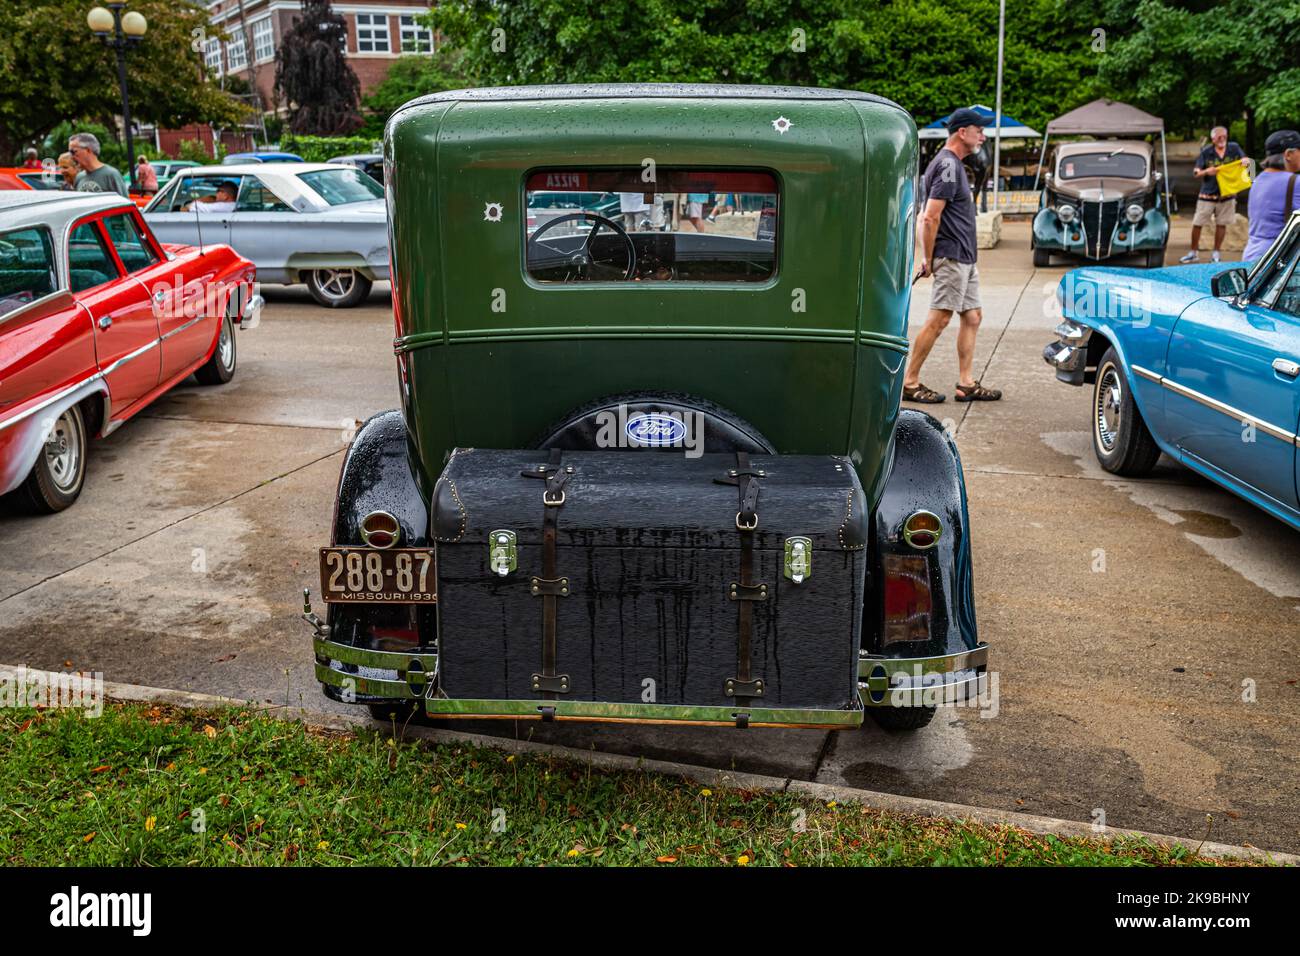 Des Moines, IA - July 01, 2022: High perspective rear view of a 1930 Ford Model A Tudor Sedan at a local car show. Stock Photo